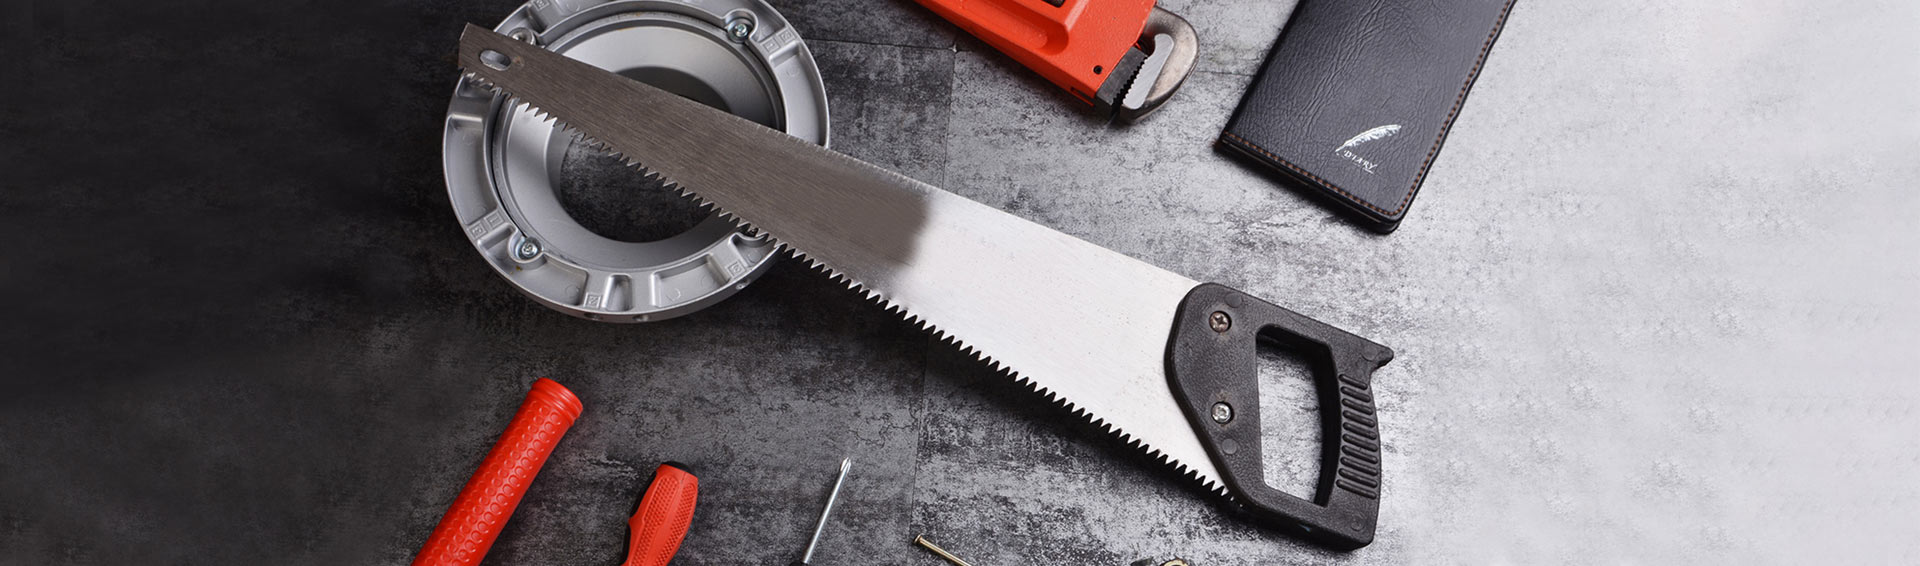 Folding Camping/Pruning Saw – thedecormaster.com